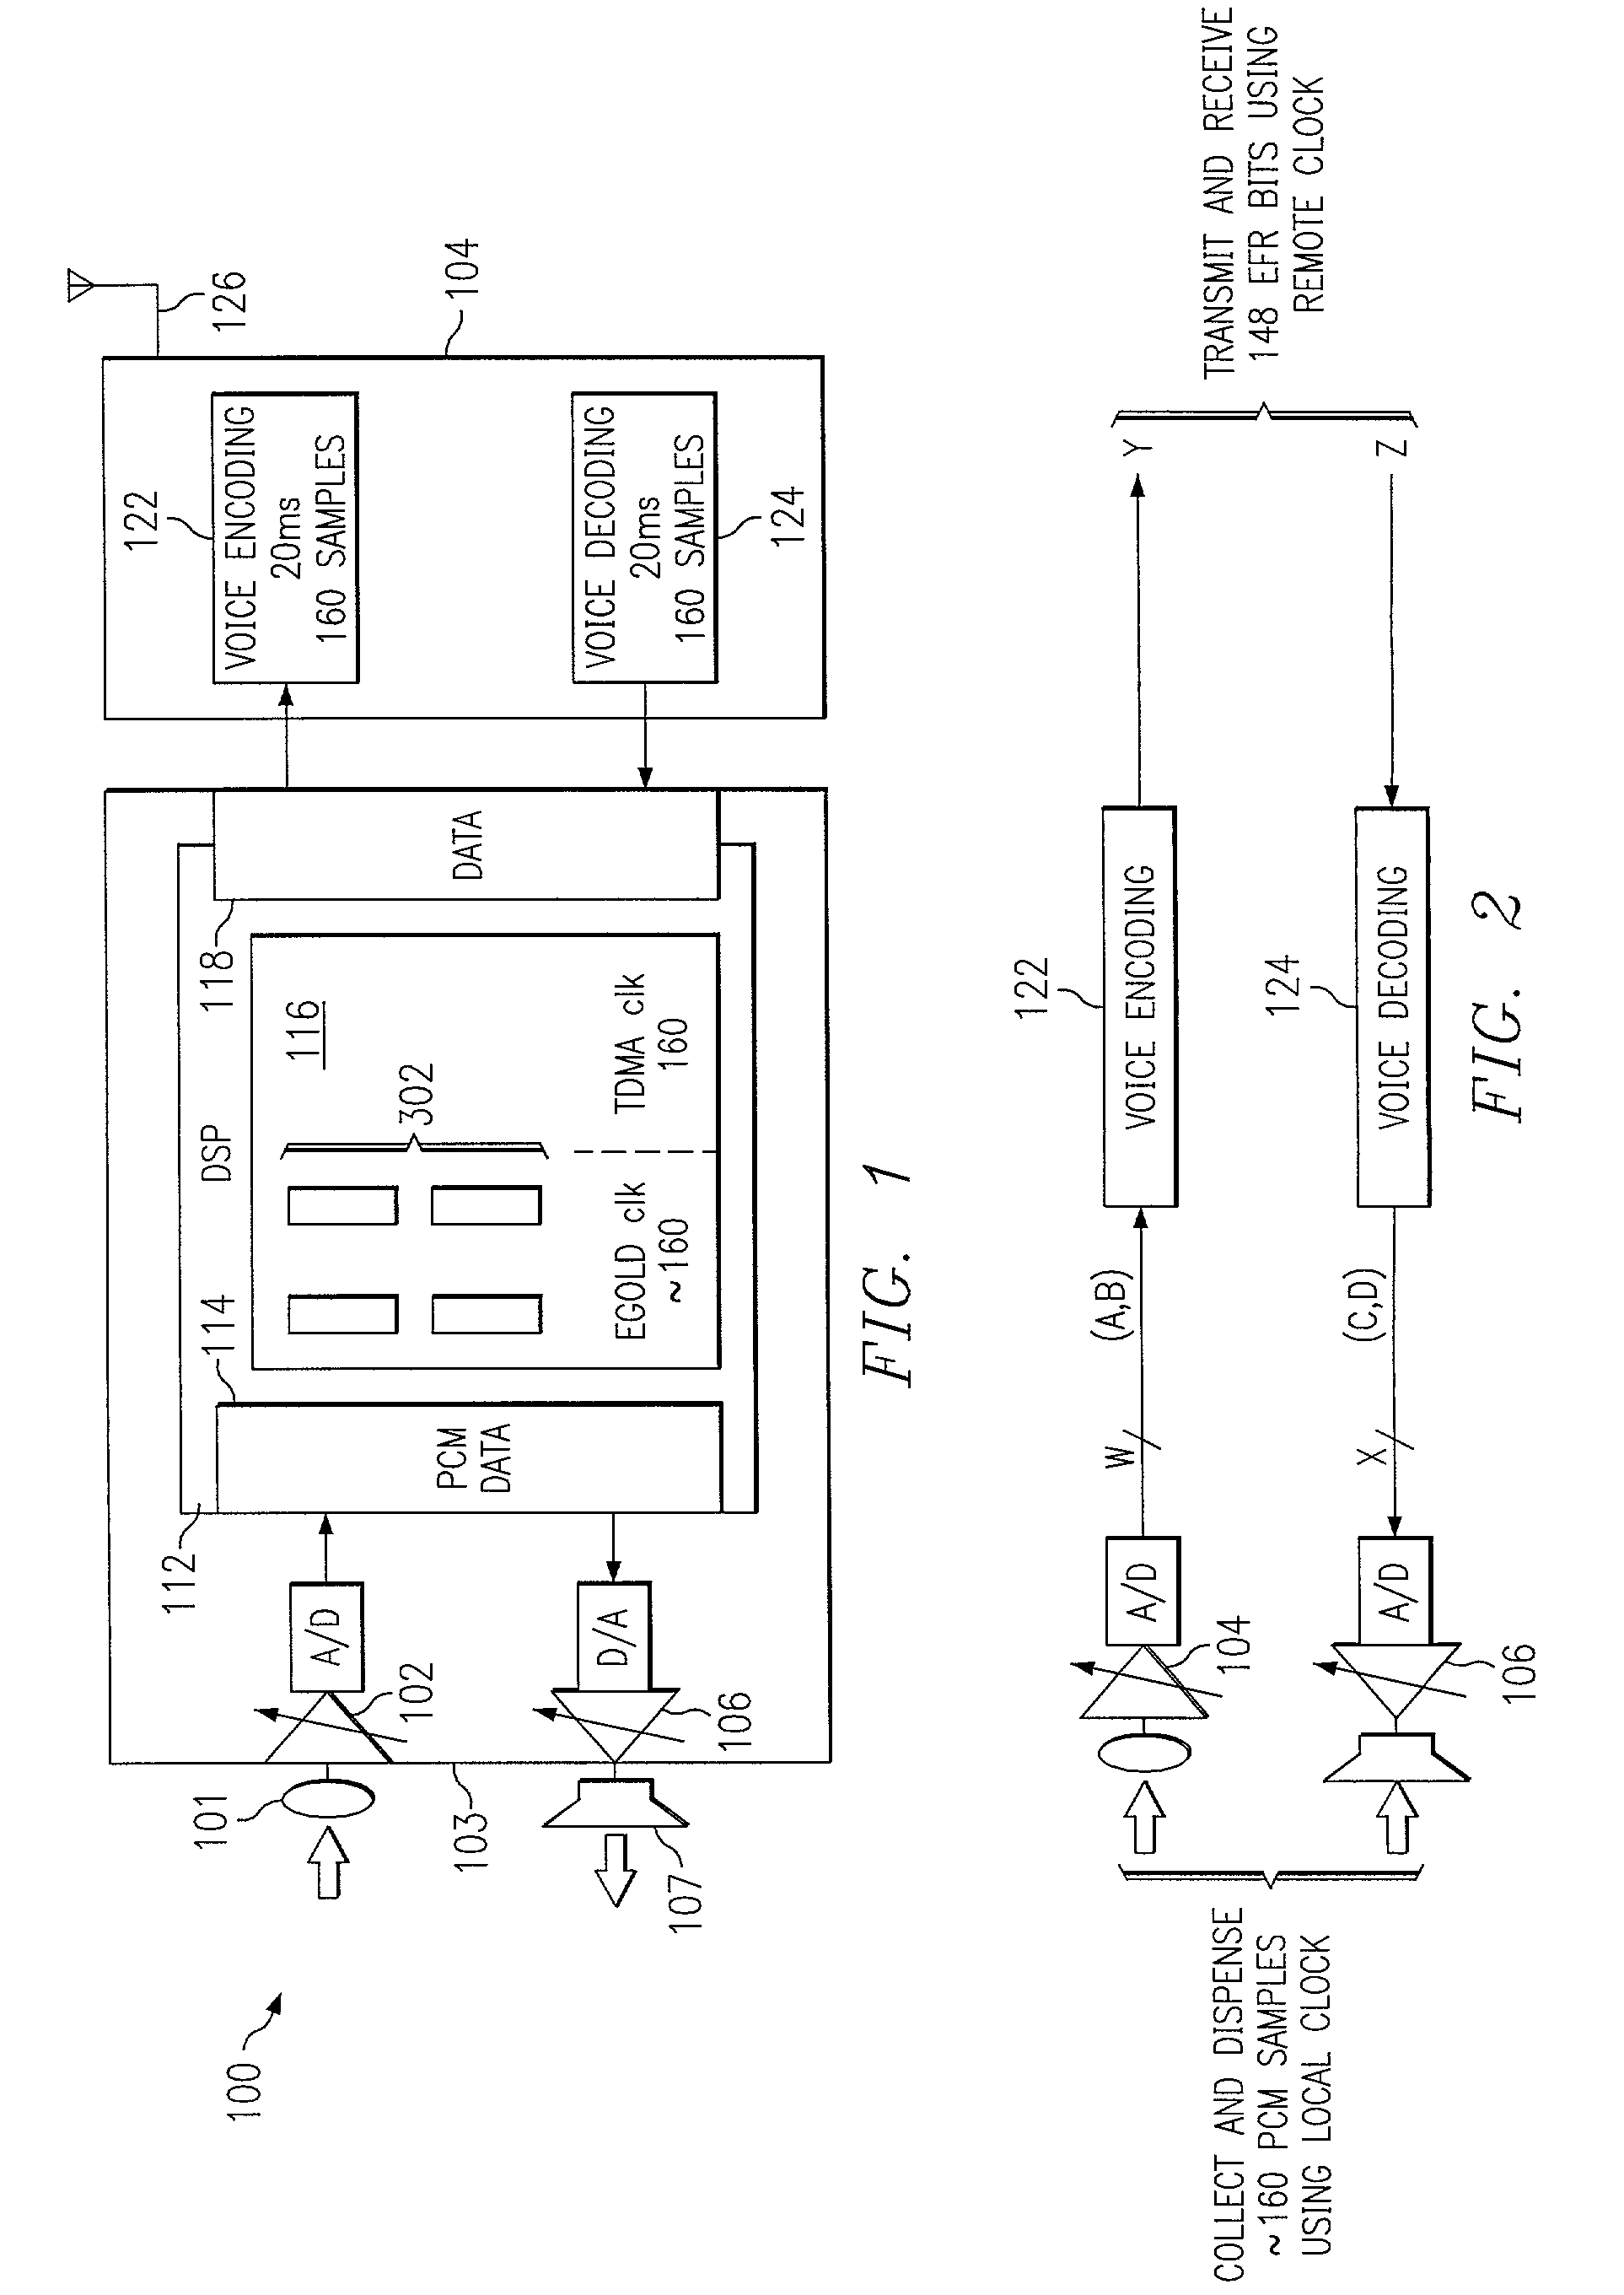 System and method for rate adaptation in a wireless communication system